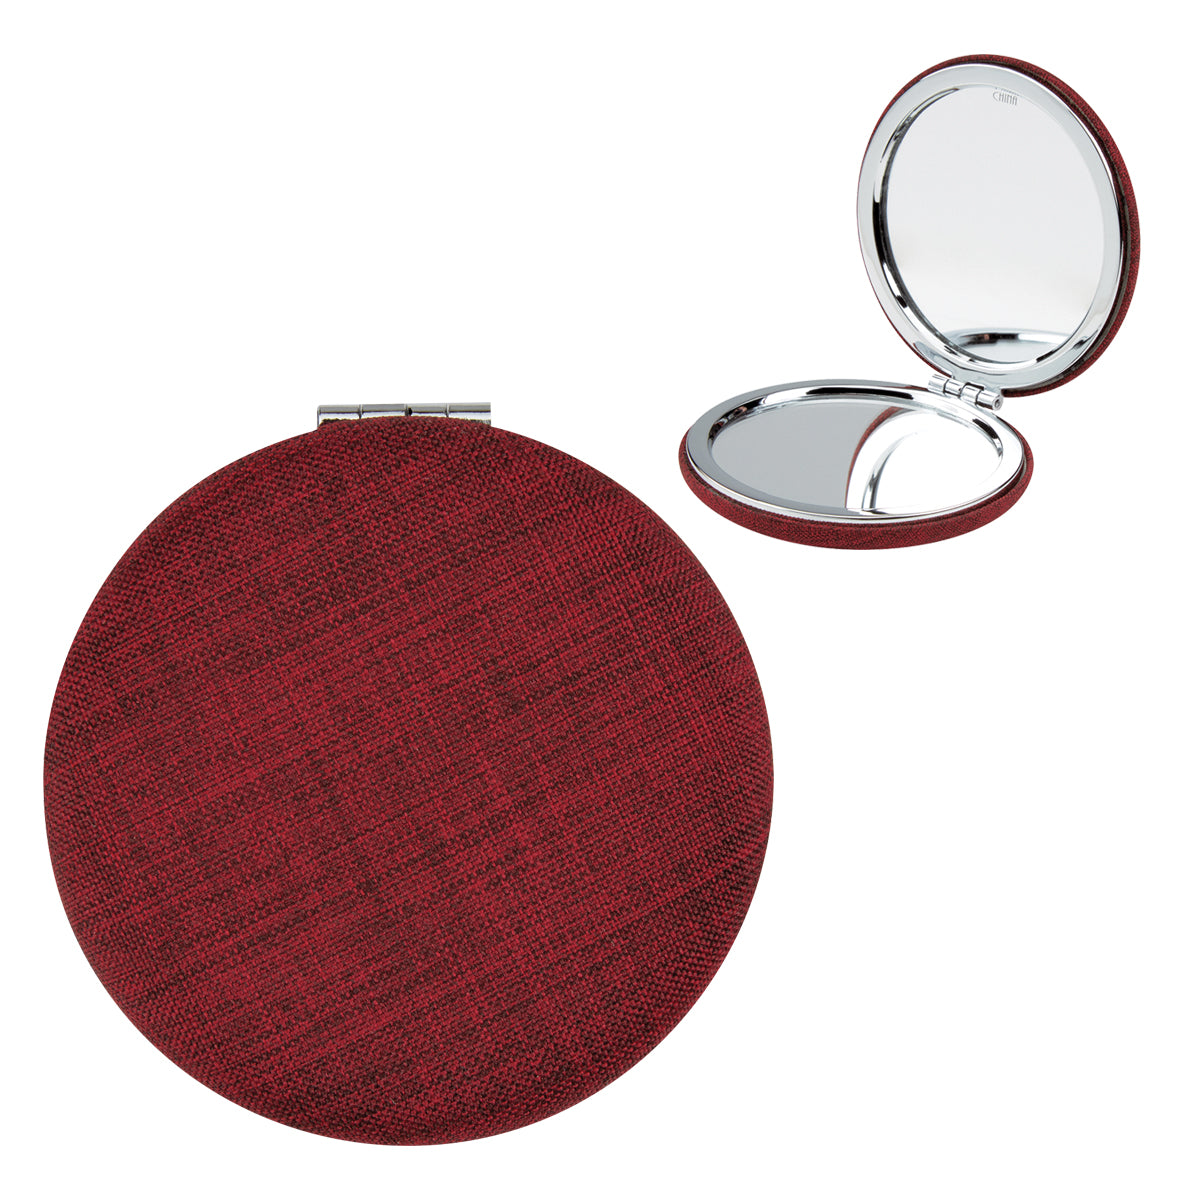 Heather Compact Mirror - Red